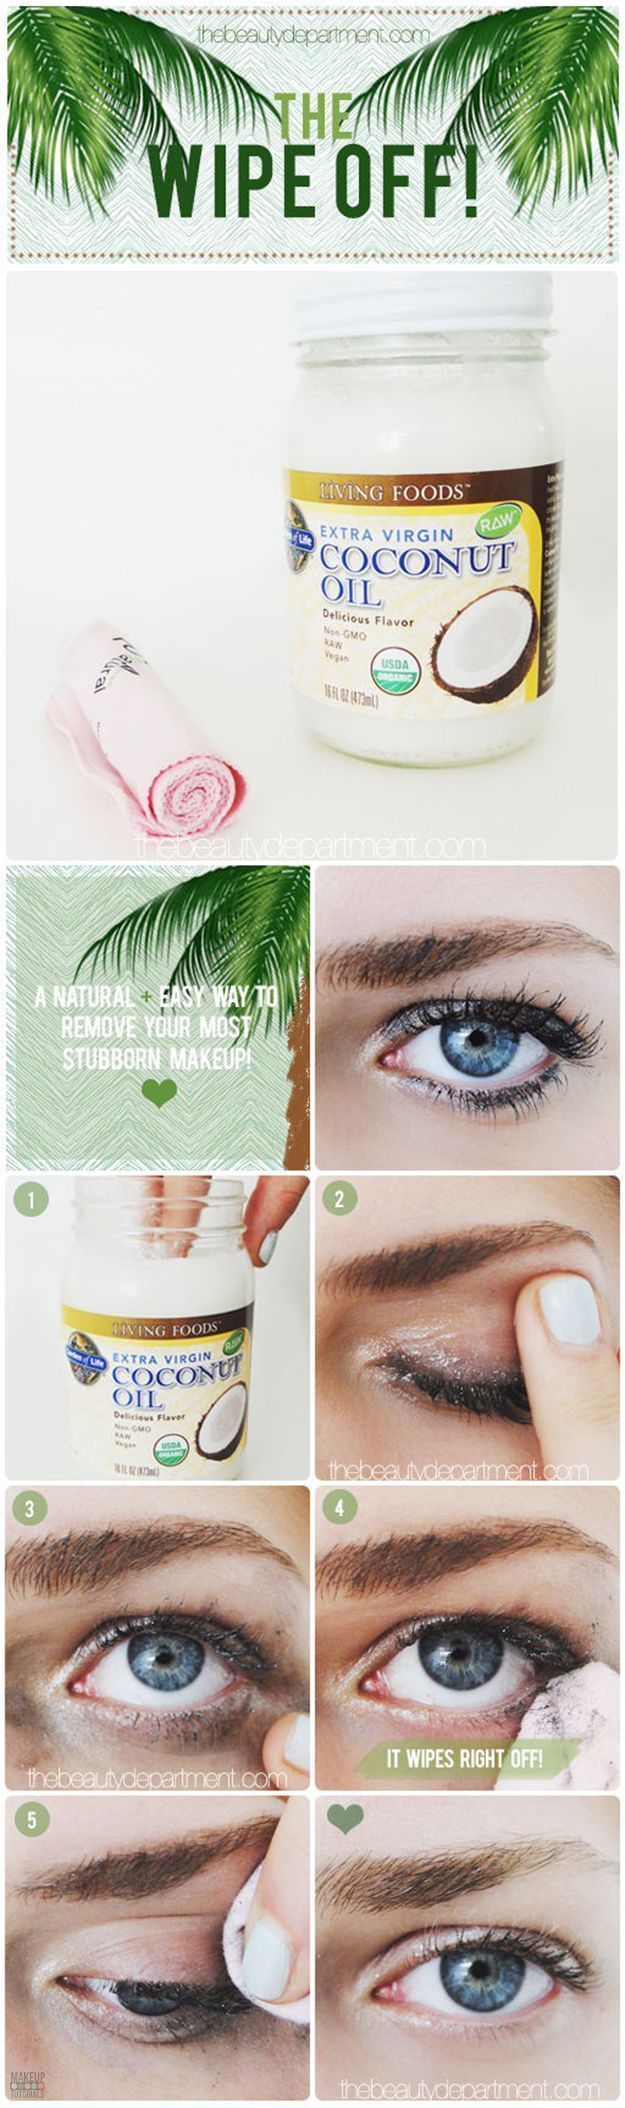 59 DIY Beauty Tutorials | Beauty Hacks You Need To Know About by Makeup Tutorial...